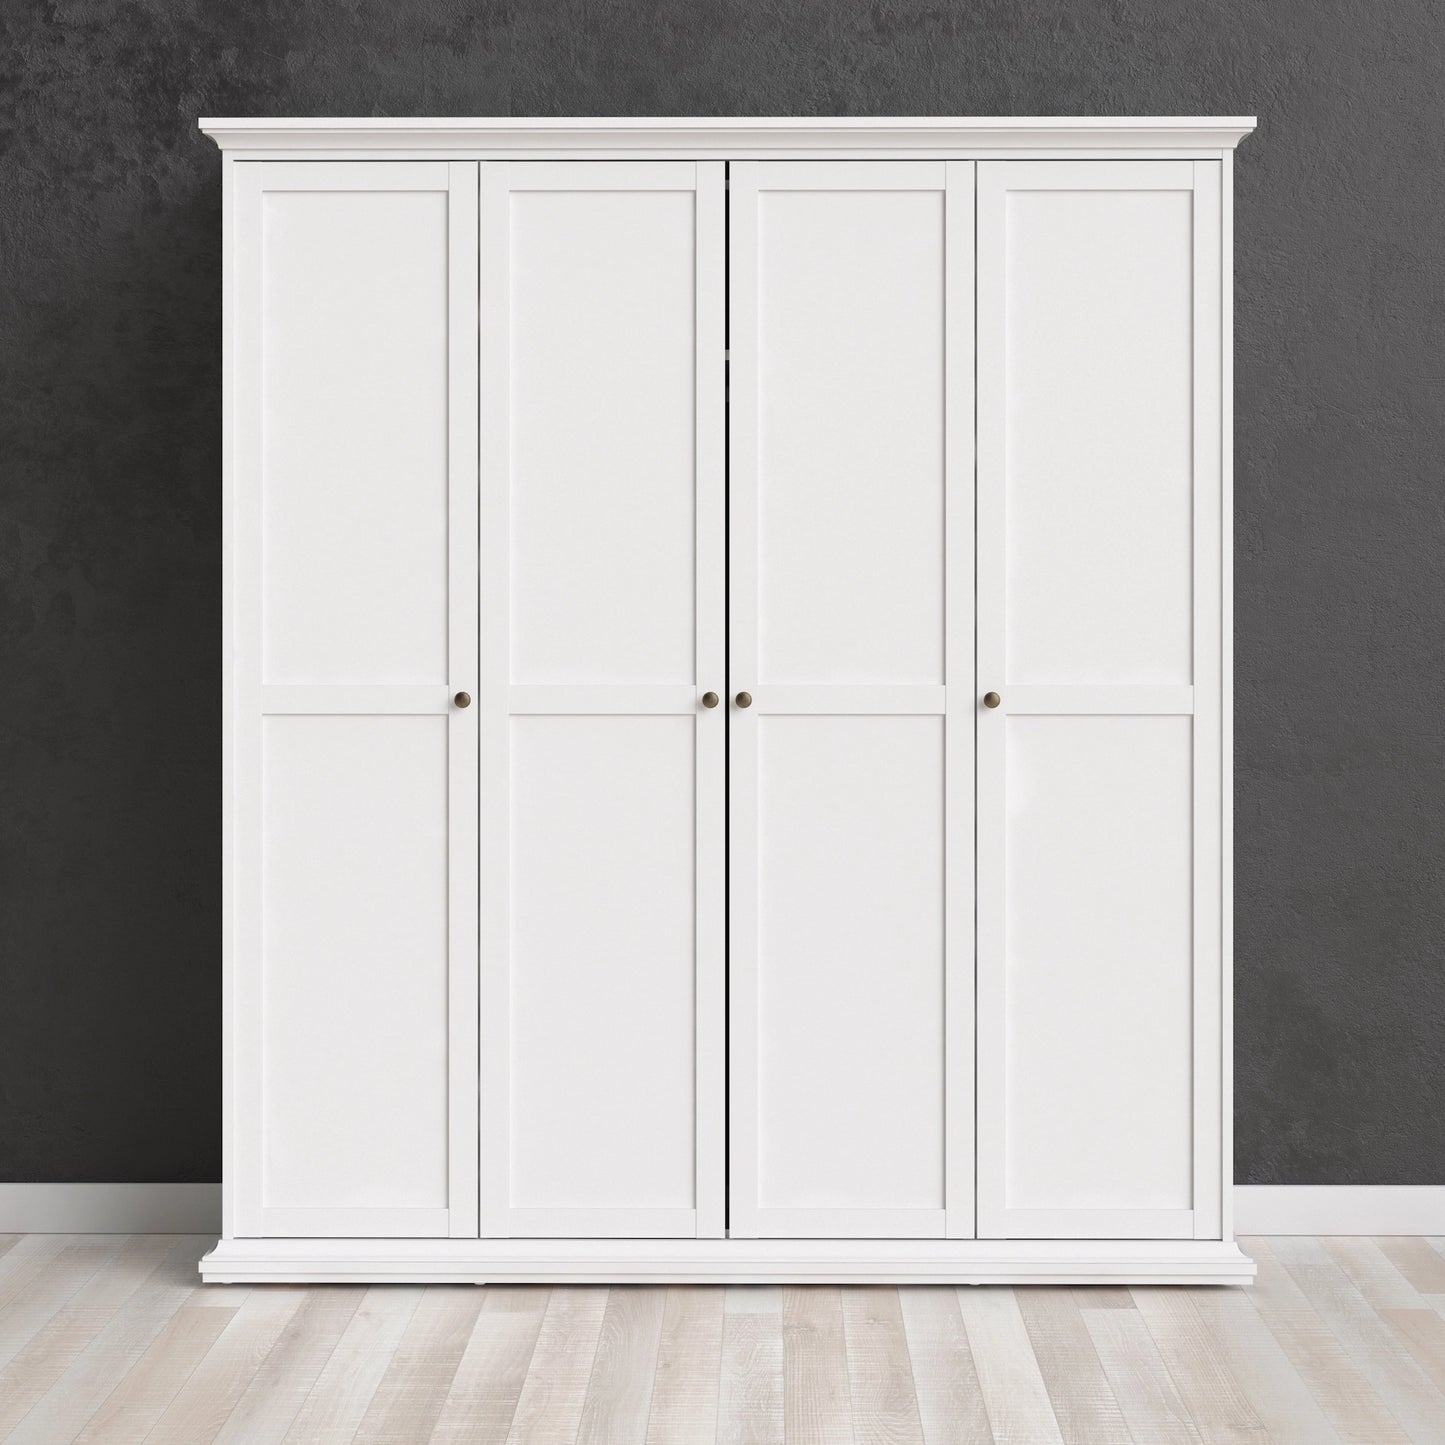 Furniture To Go Paris Wardrobe with 4 Doors in White